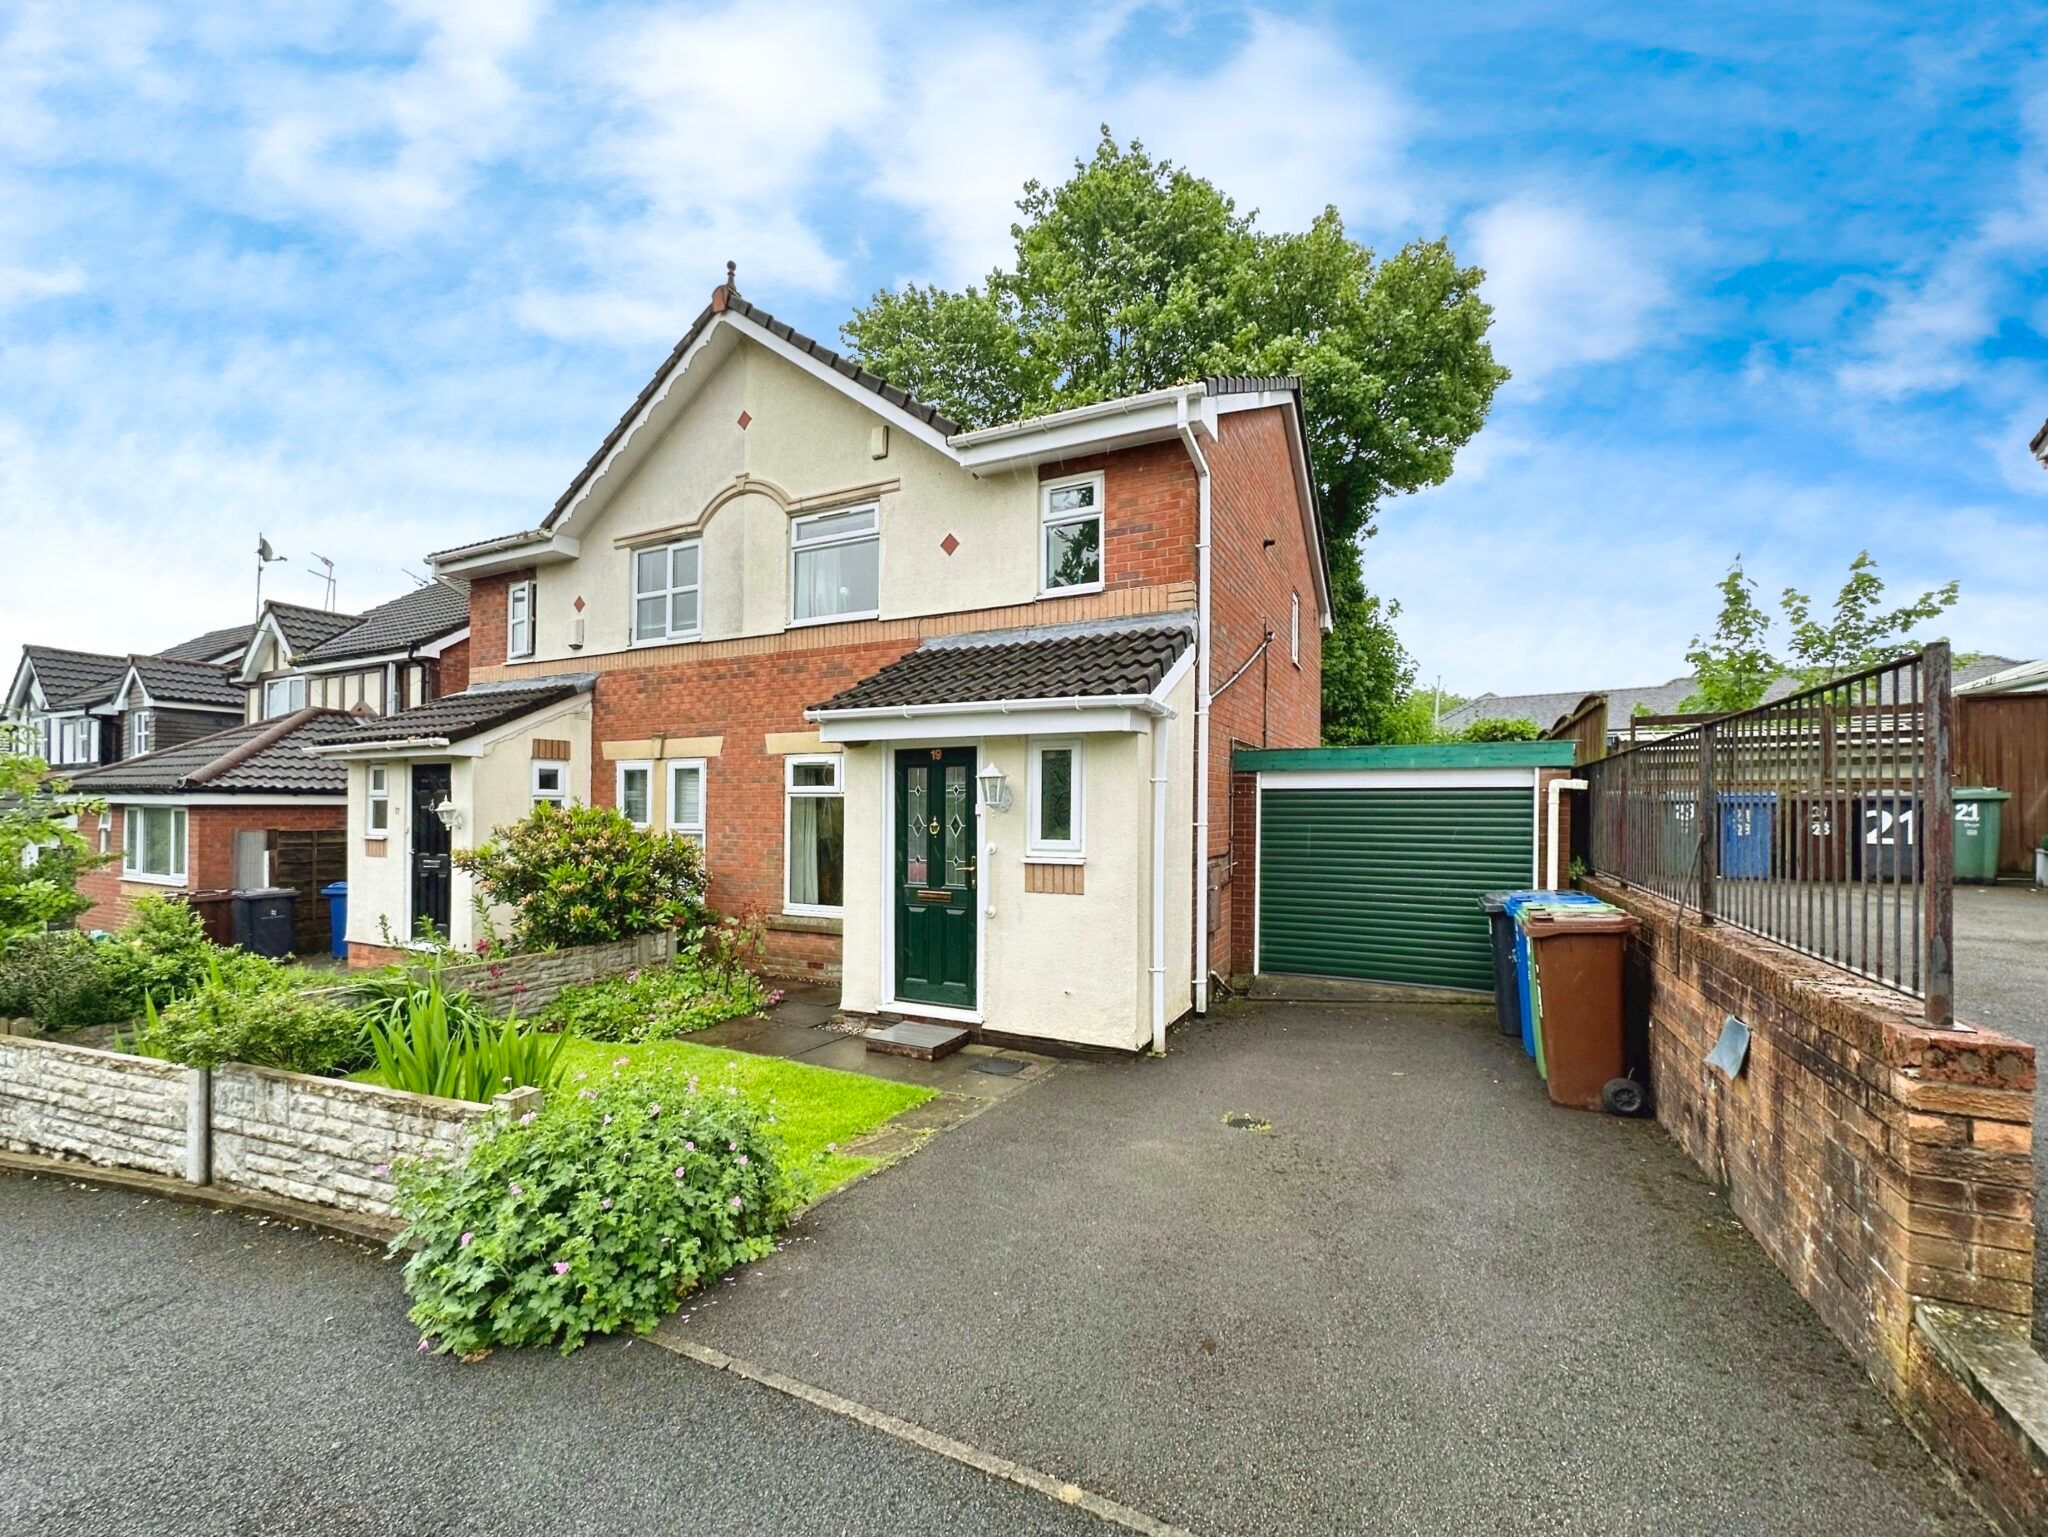 Oxbow Way, Whitefield, Manchester, Manchester, M45 8SG